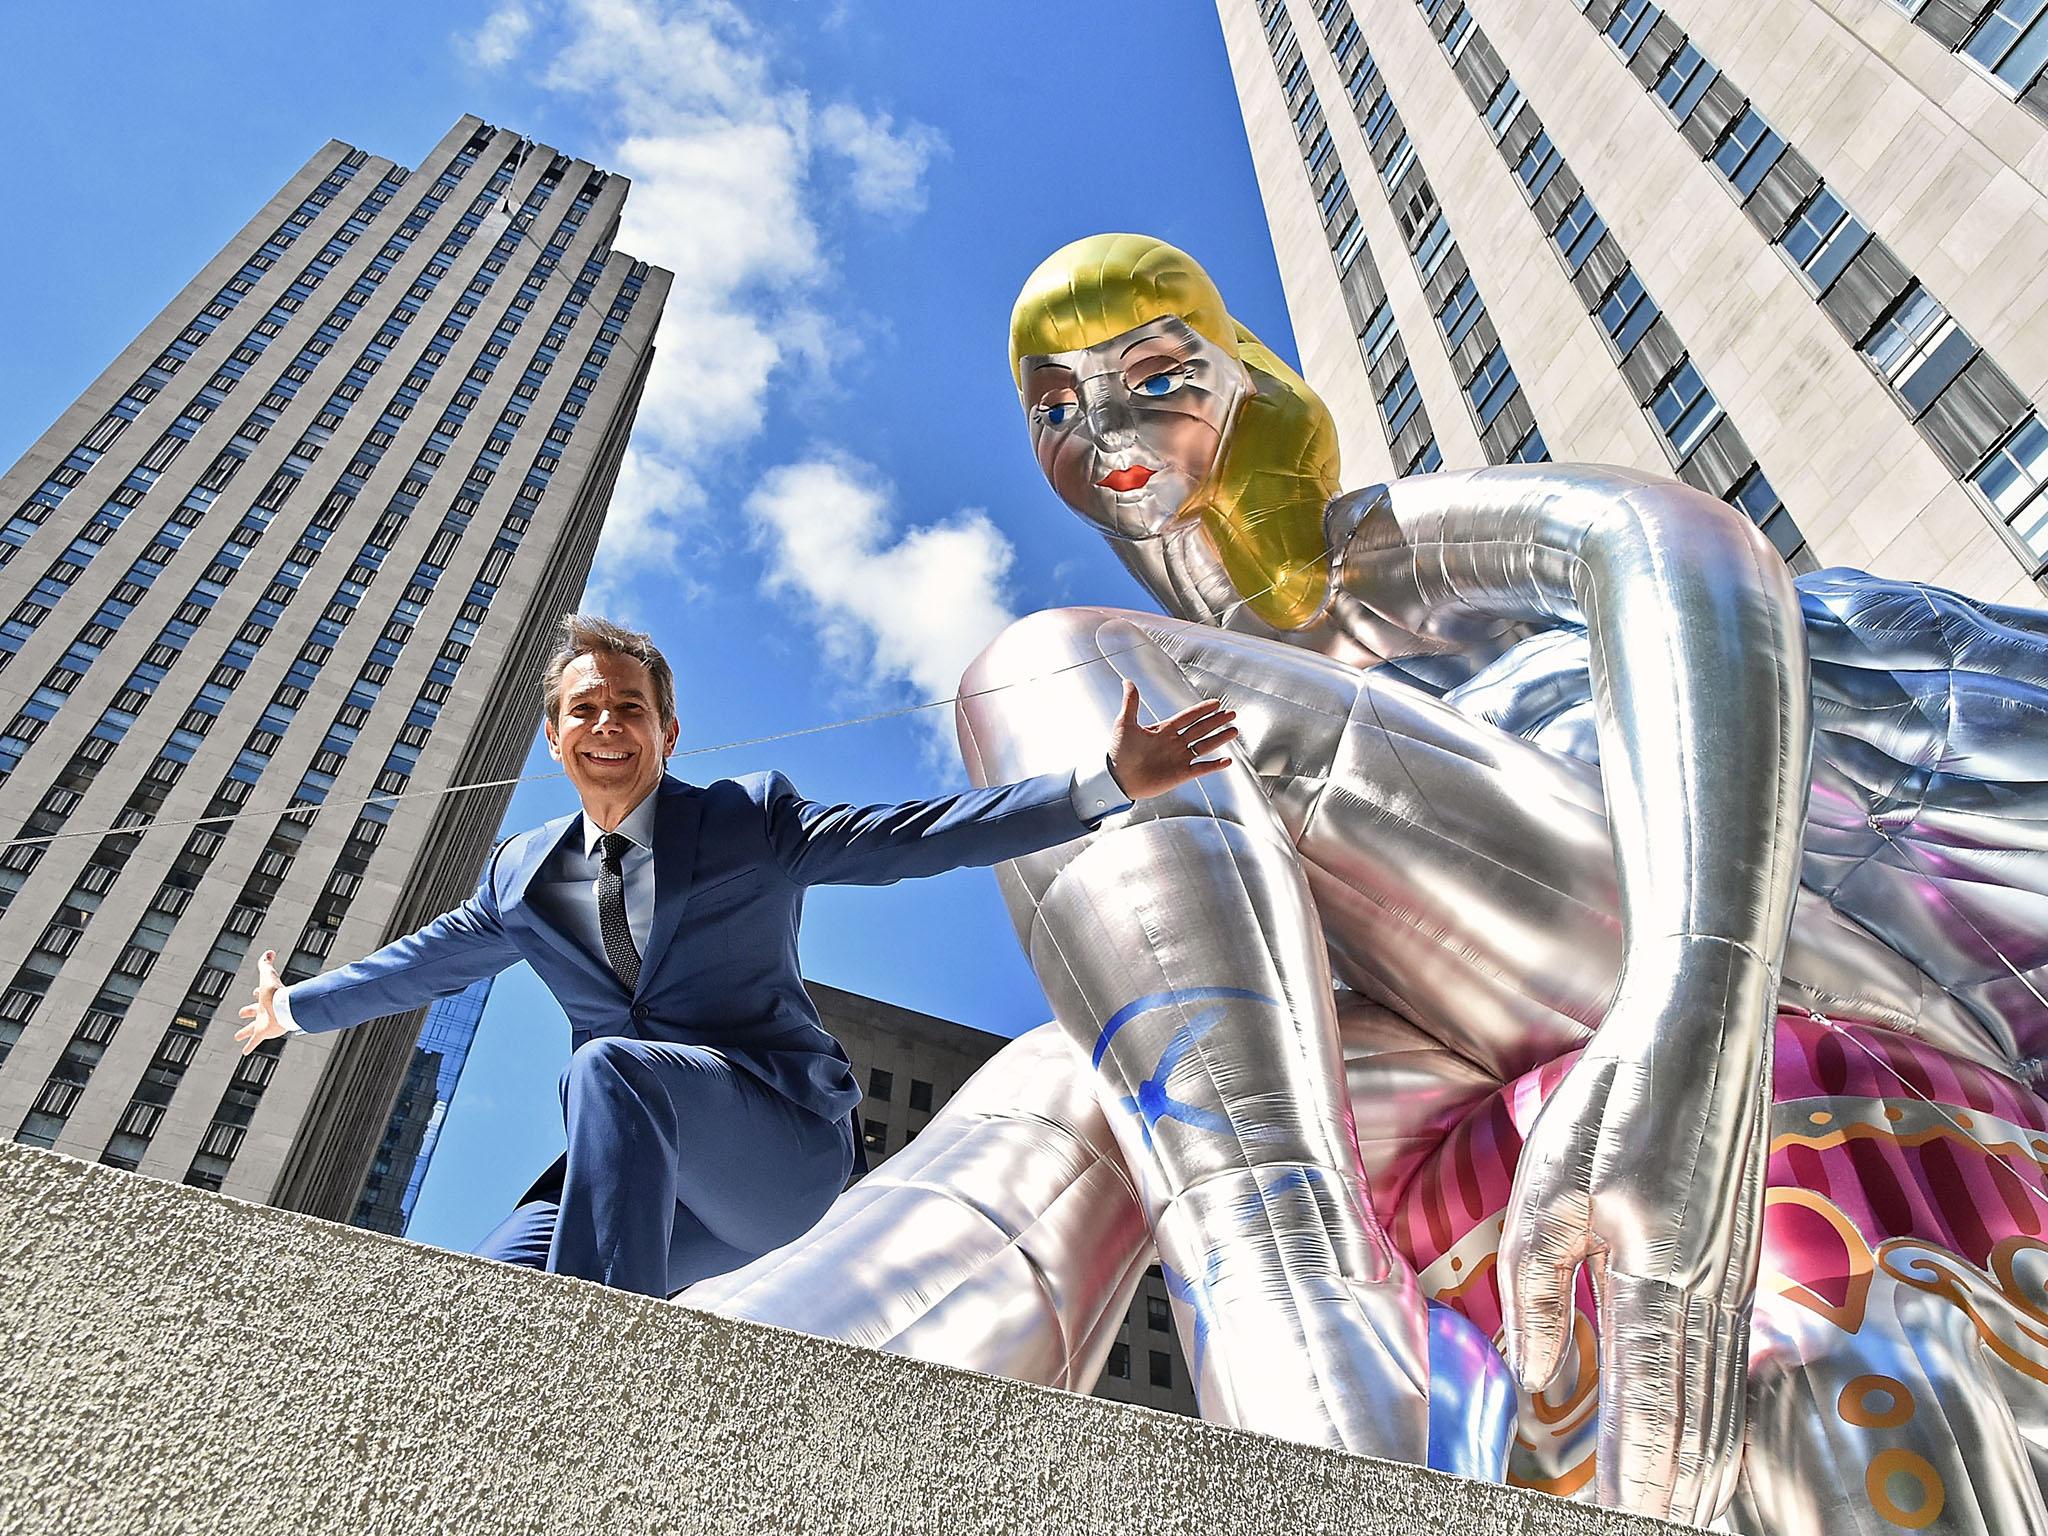 Koons unveils his seated ballerina inflatable sculpture at New York’s Rockefeller Center in May 2017